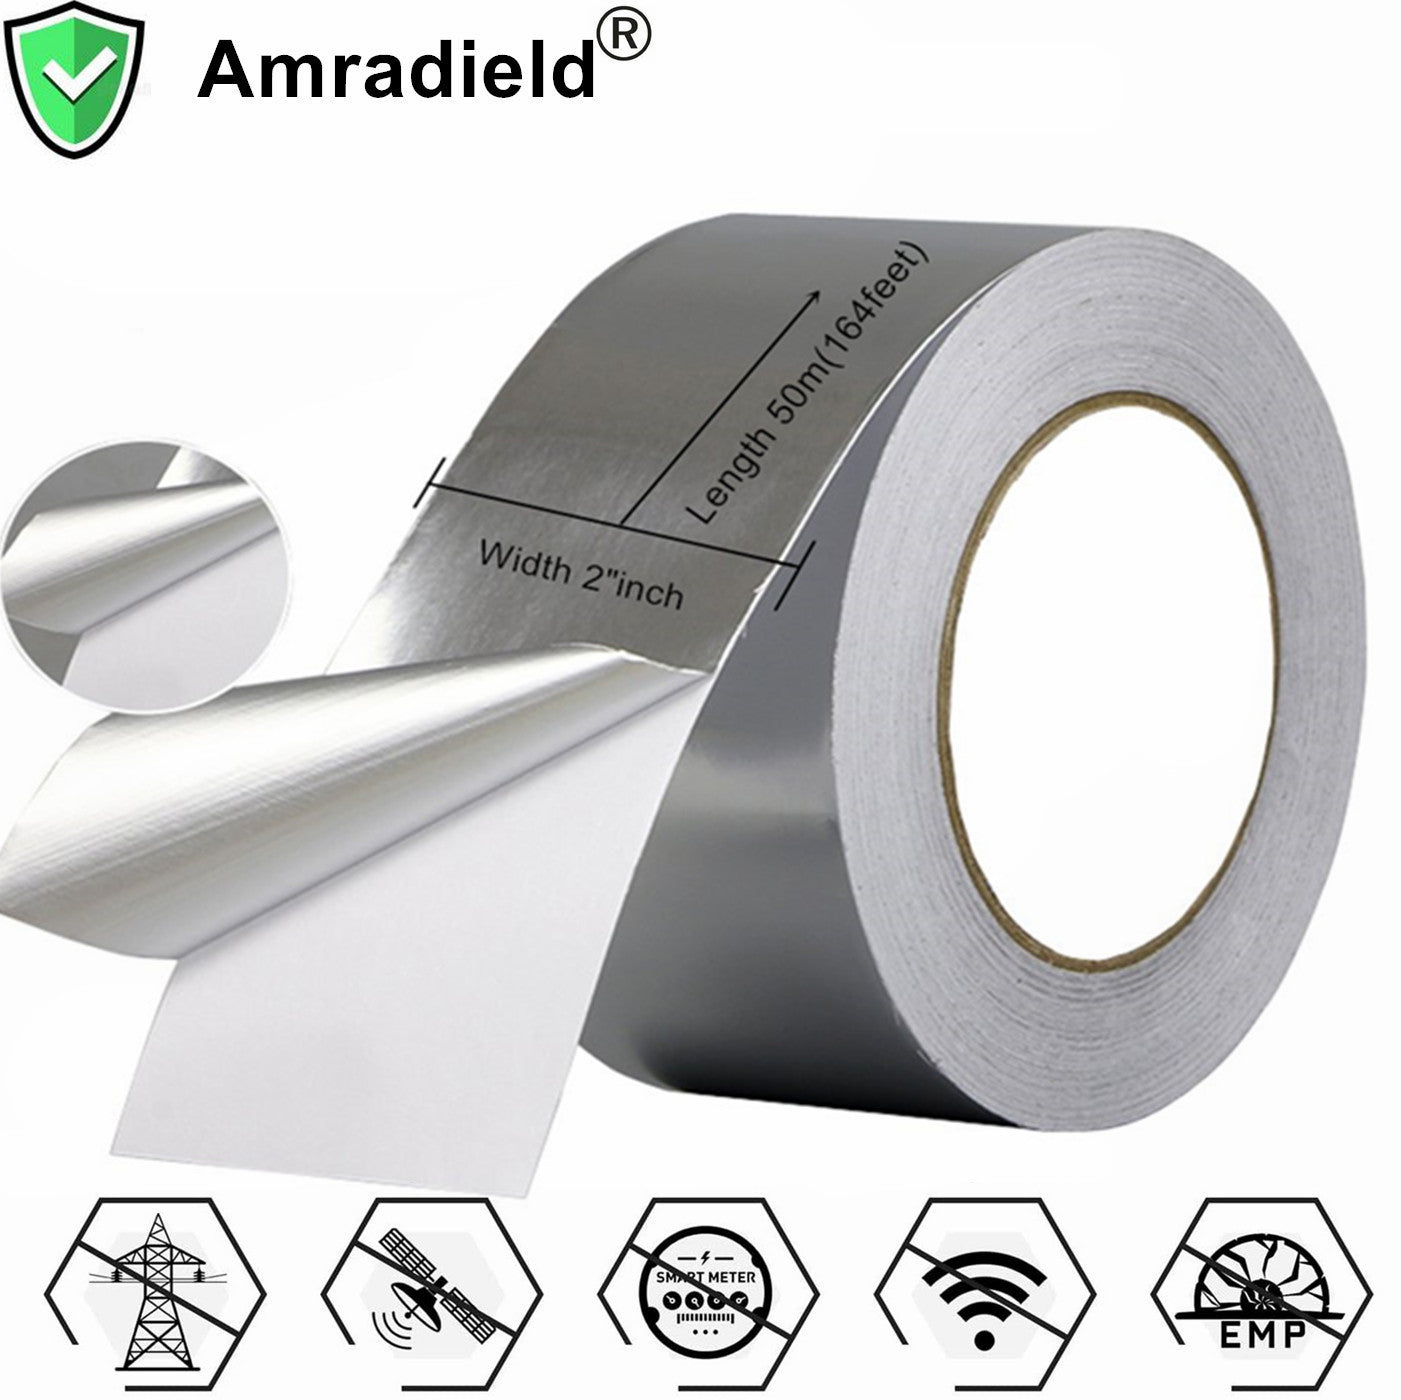 Aluminum Tape/Aluminum Foil Tape -2 inch Wide x 164 feet Long (Thickness 3.4 mil),Perfect for HVAC, Duct, Pipe, Insulation,Metal Repair